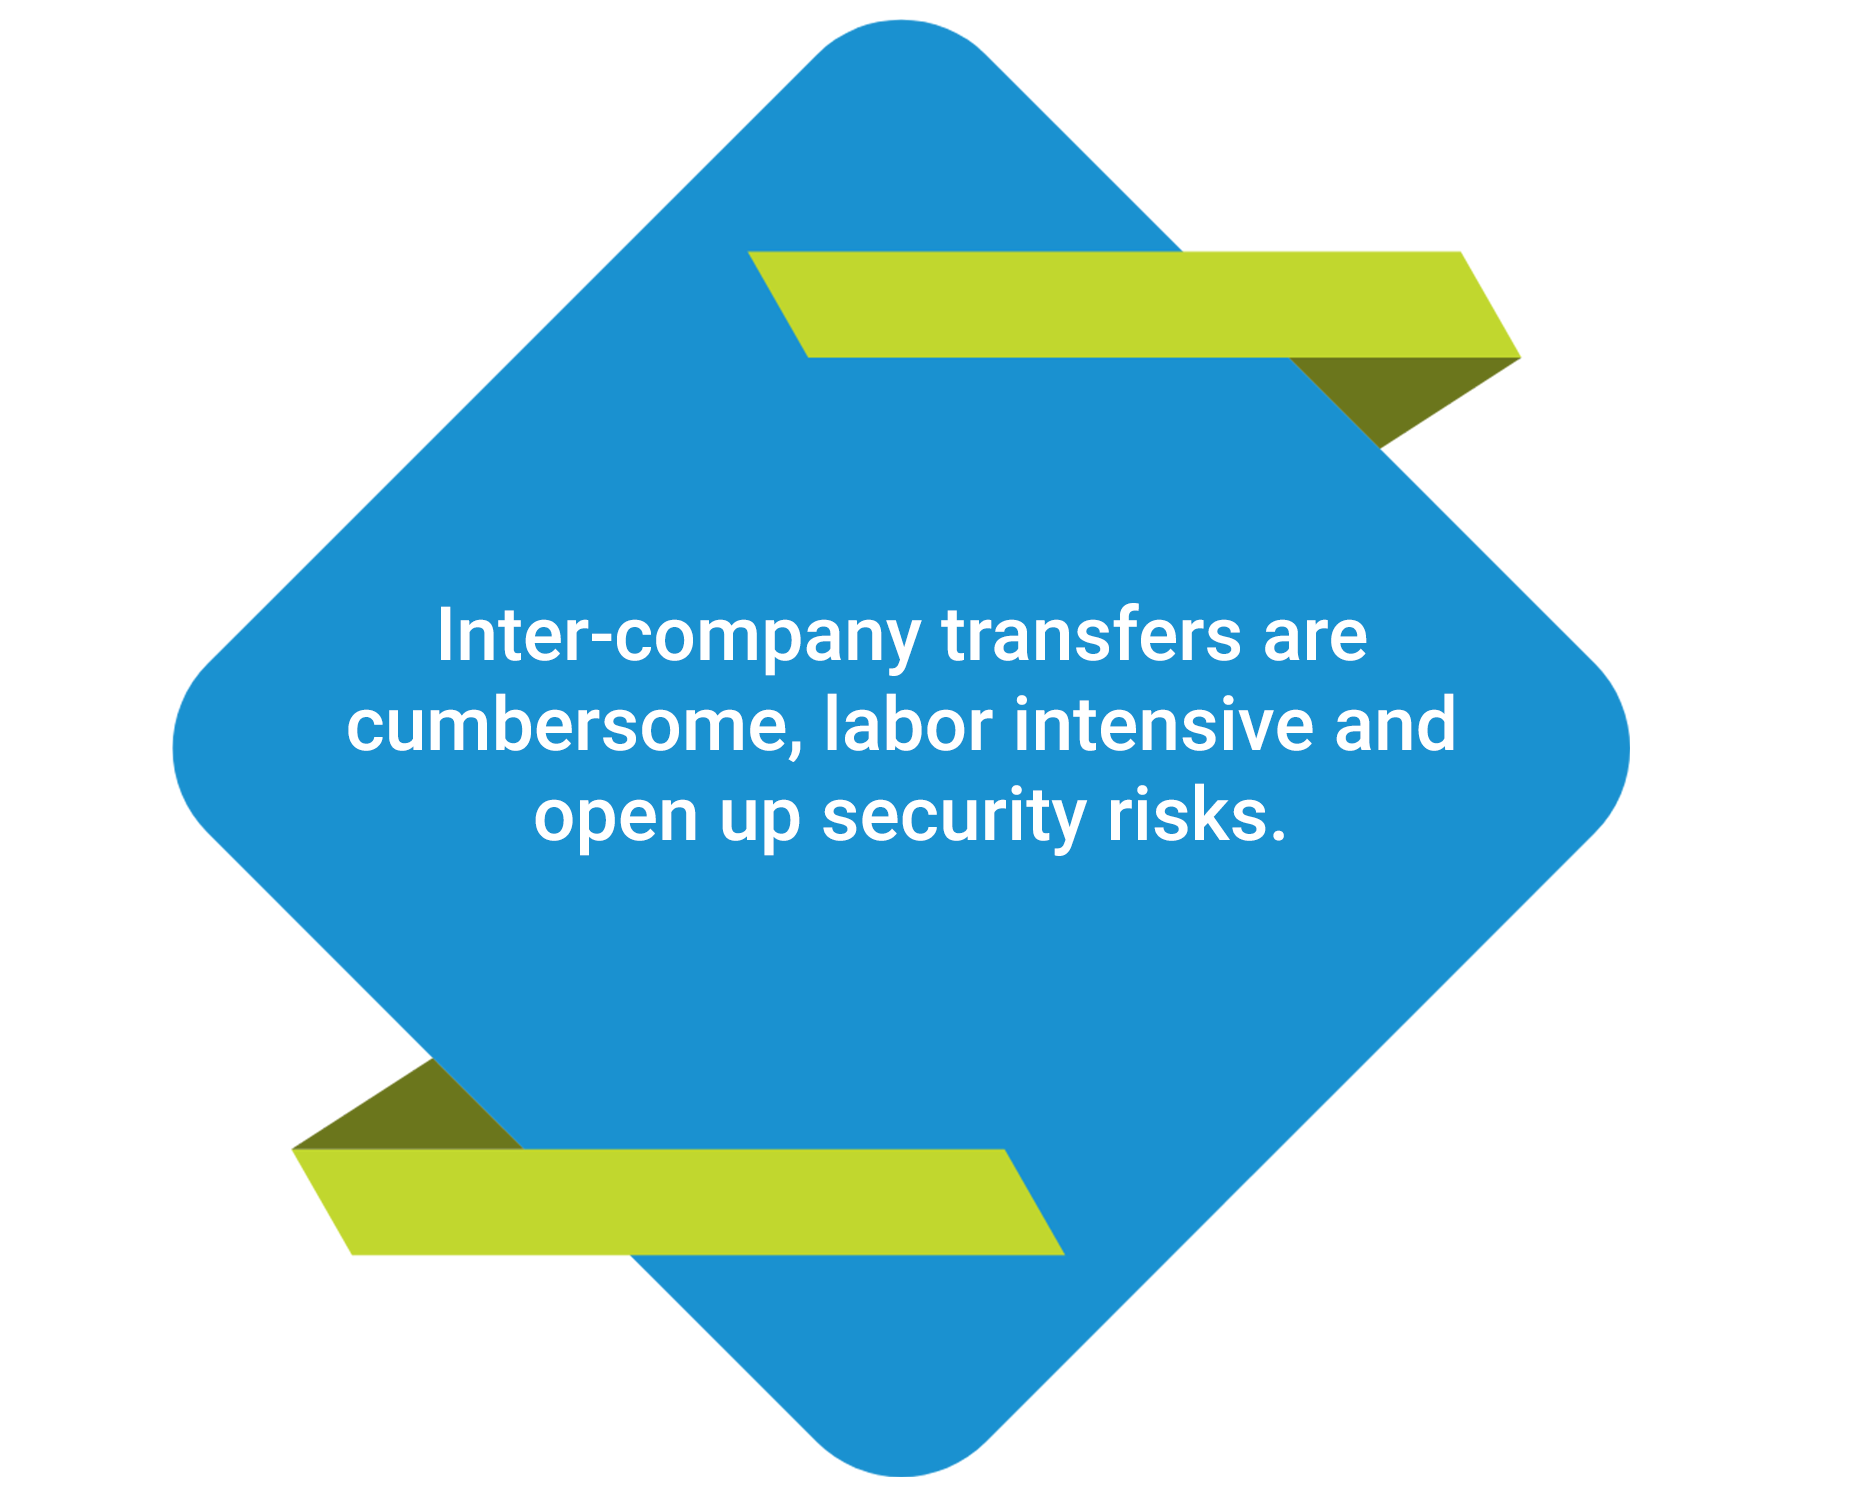 Inter-company transfers are cumbersome, labor-intensive and open up security risks.